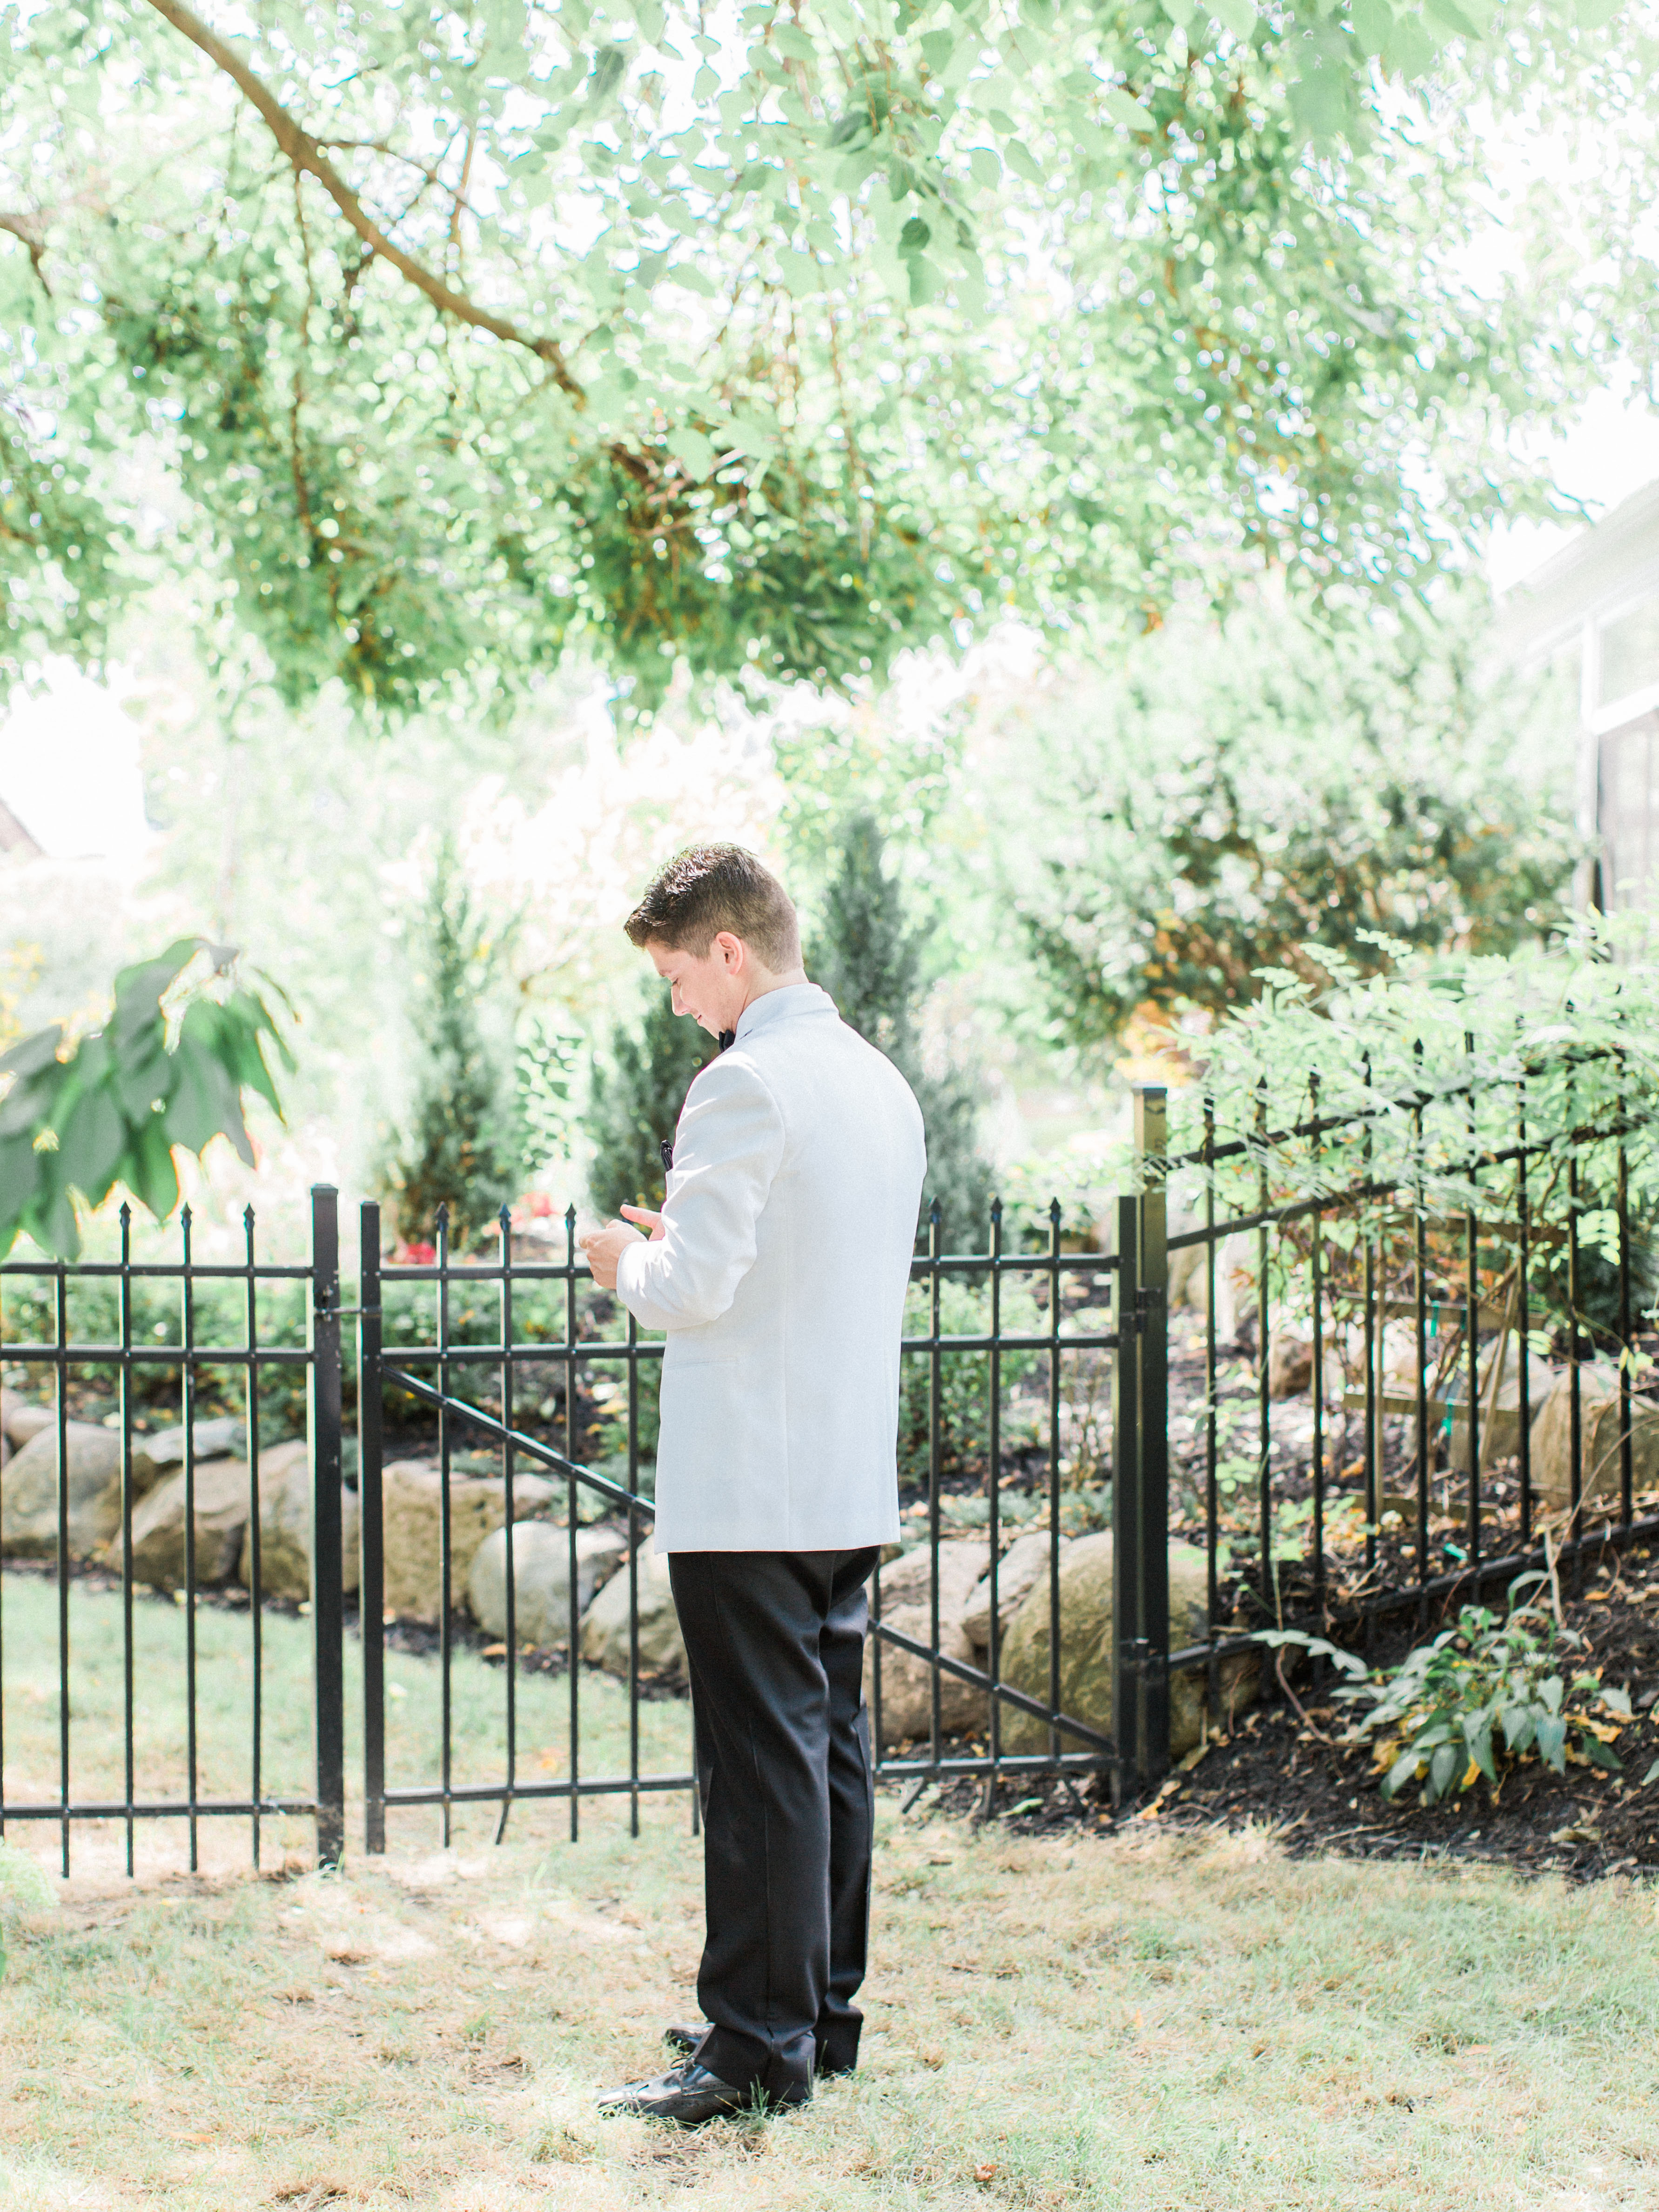 First Look Wedding | The Day's Design | Samantha James Photography